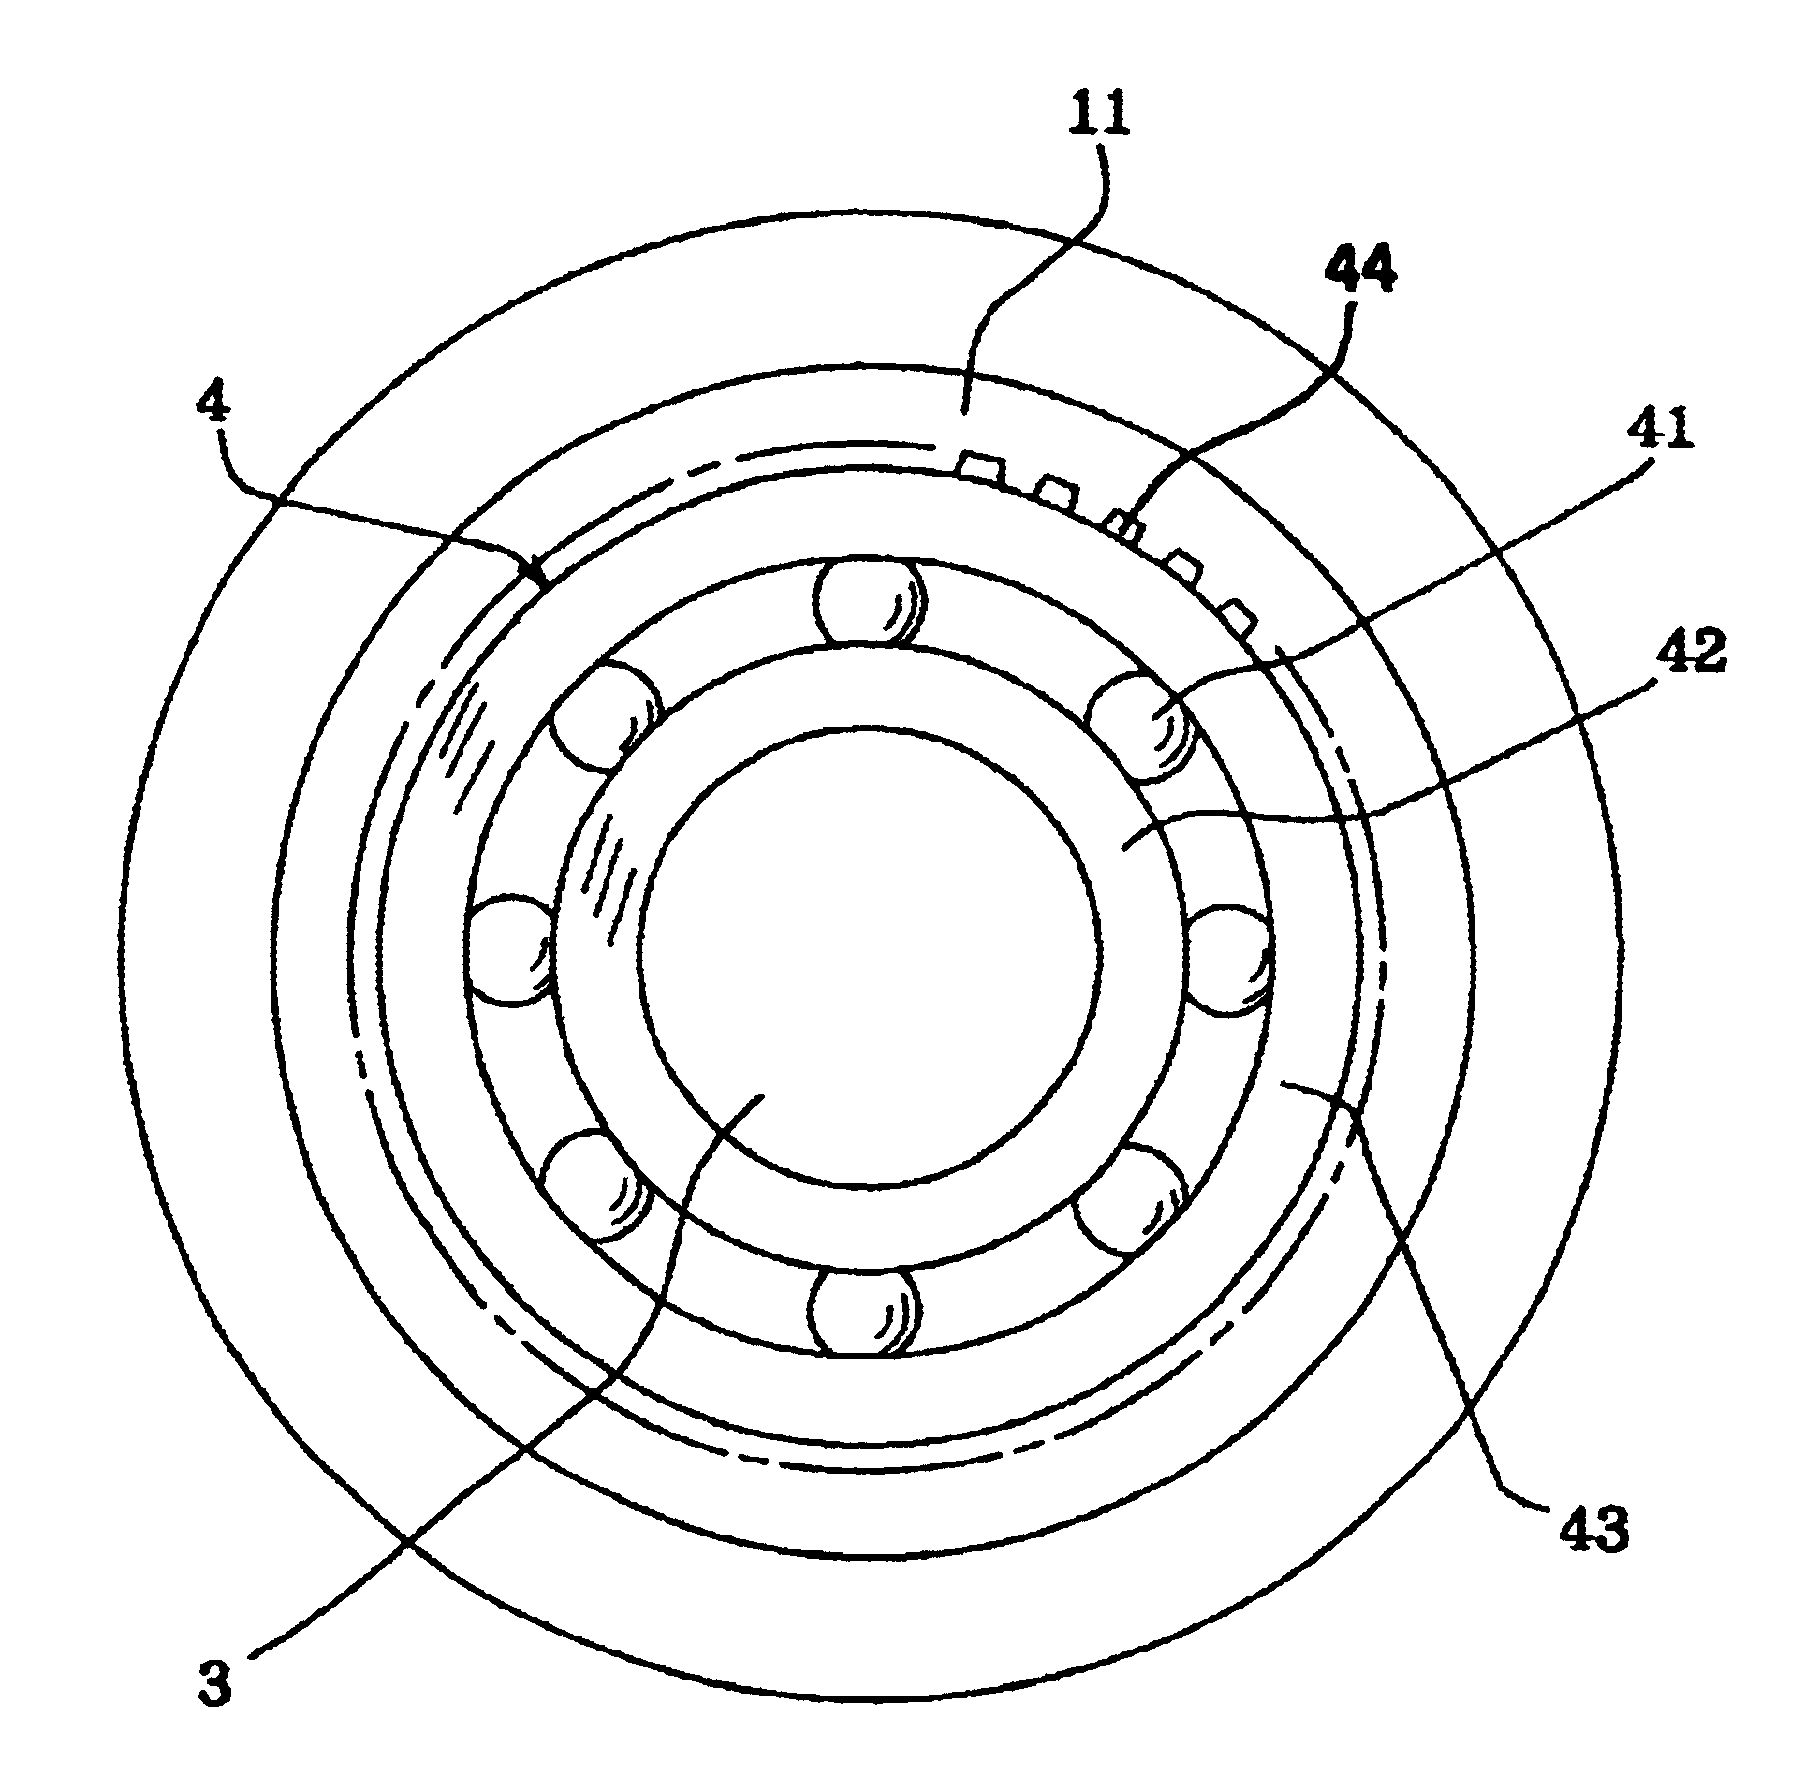 Motor with a stationary shaft with formed knurled grooves on shaft and/or housing